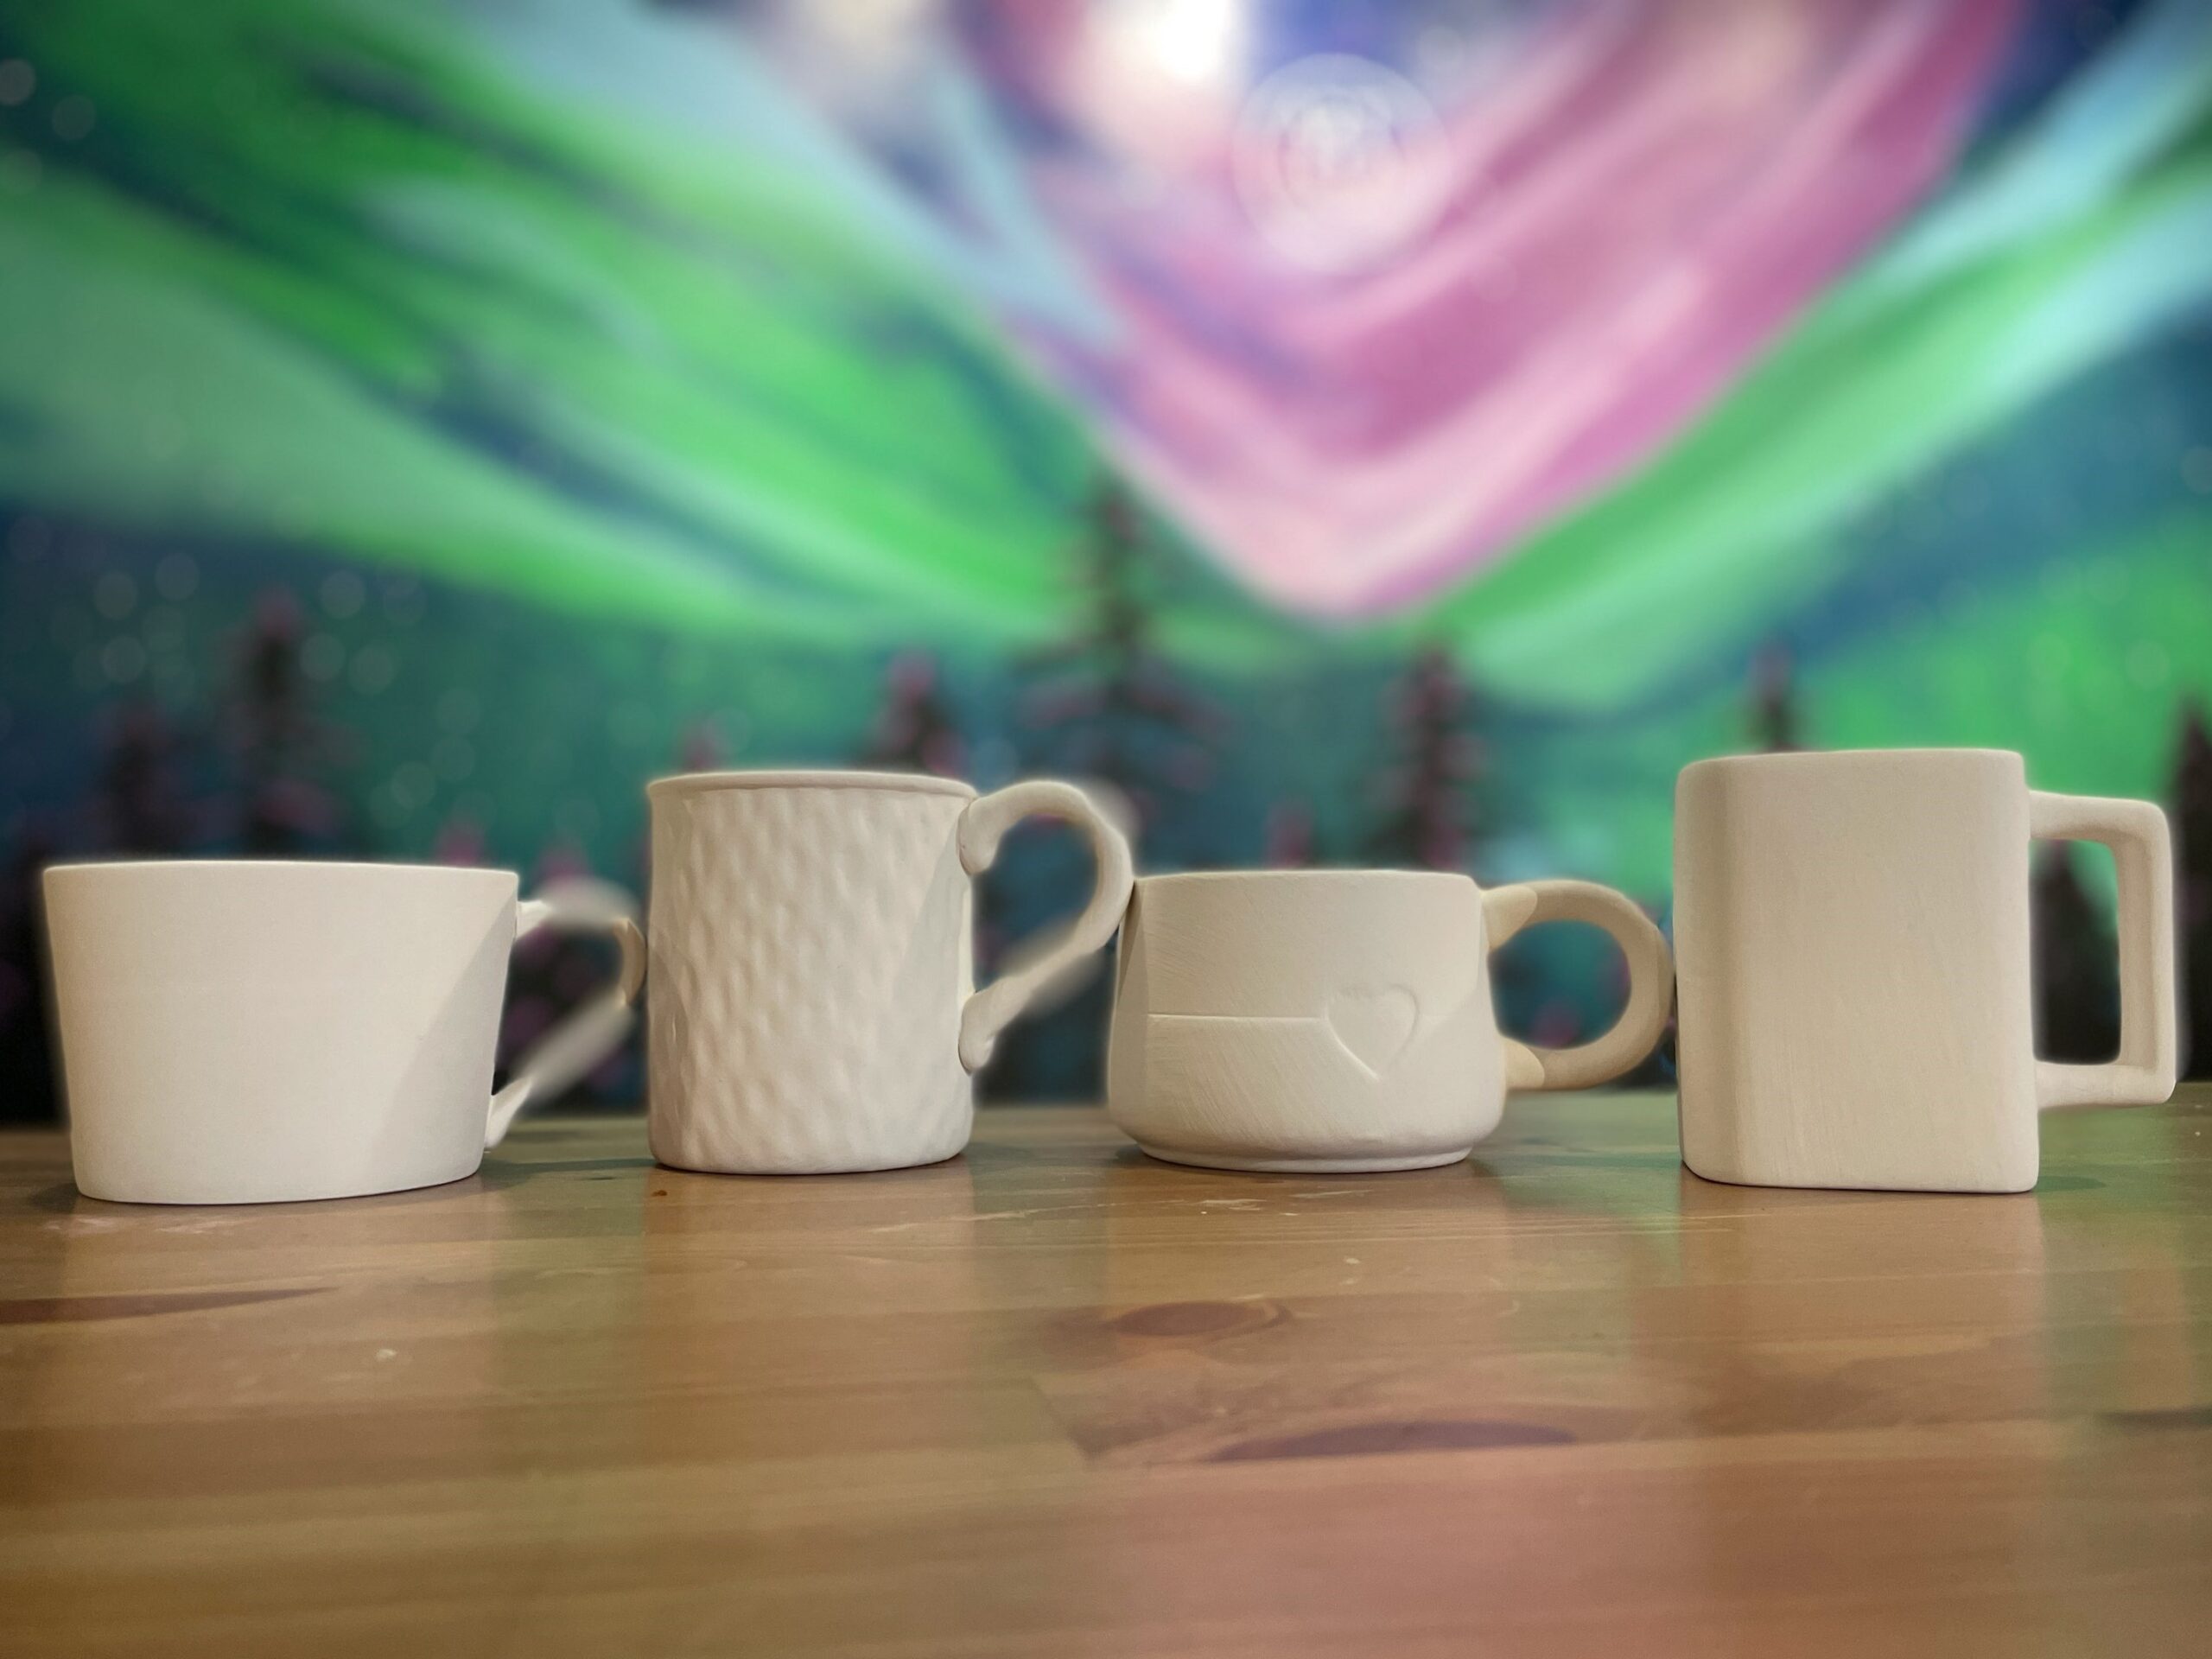 https://artandclayonmain.com/wp-content/uploads/2022/01/family-paint-night-mugs-update-march-2022-1-scaled.jpg